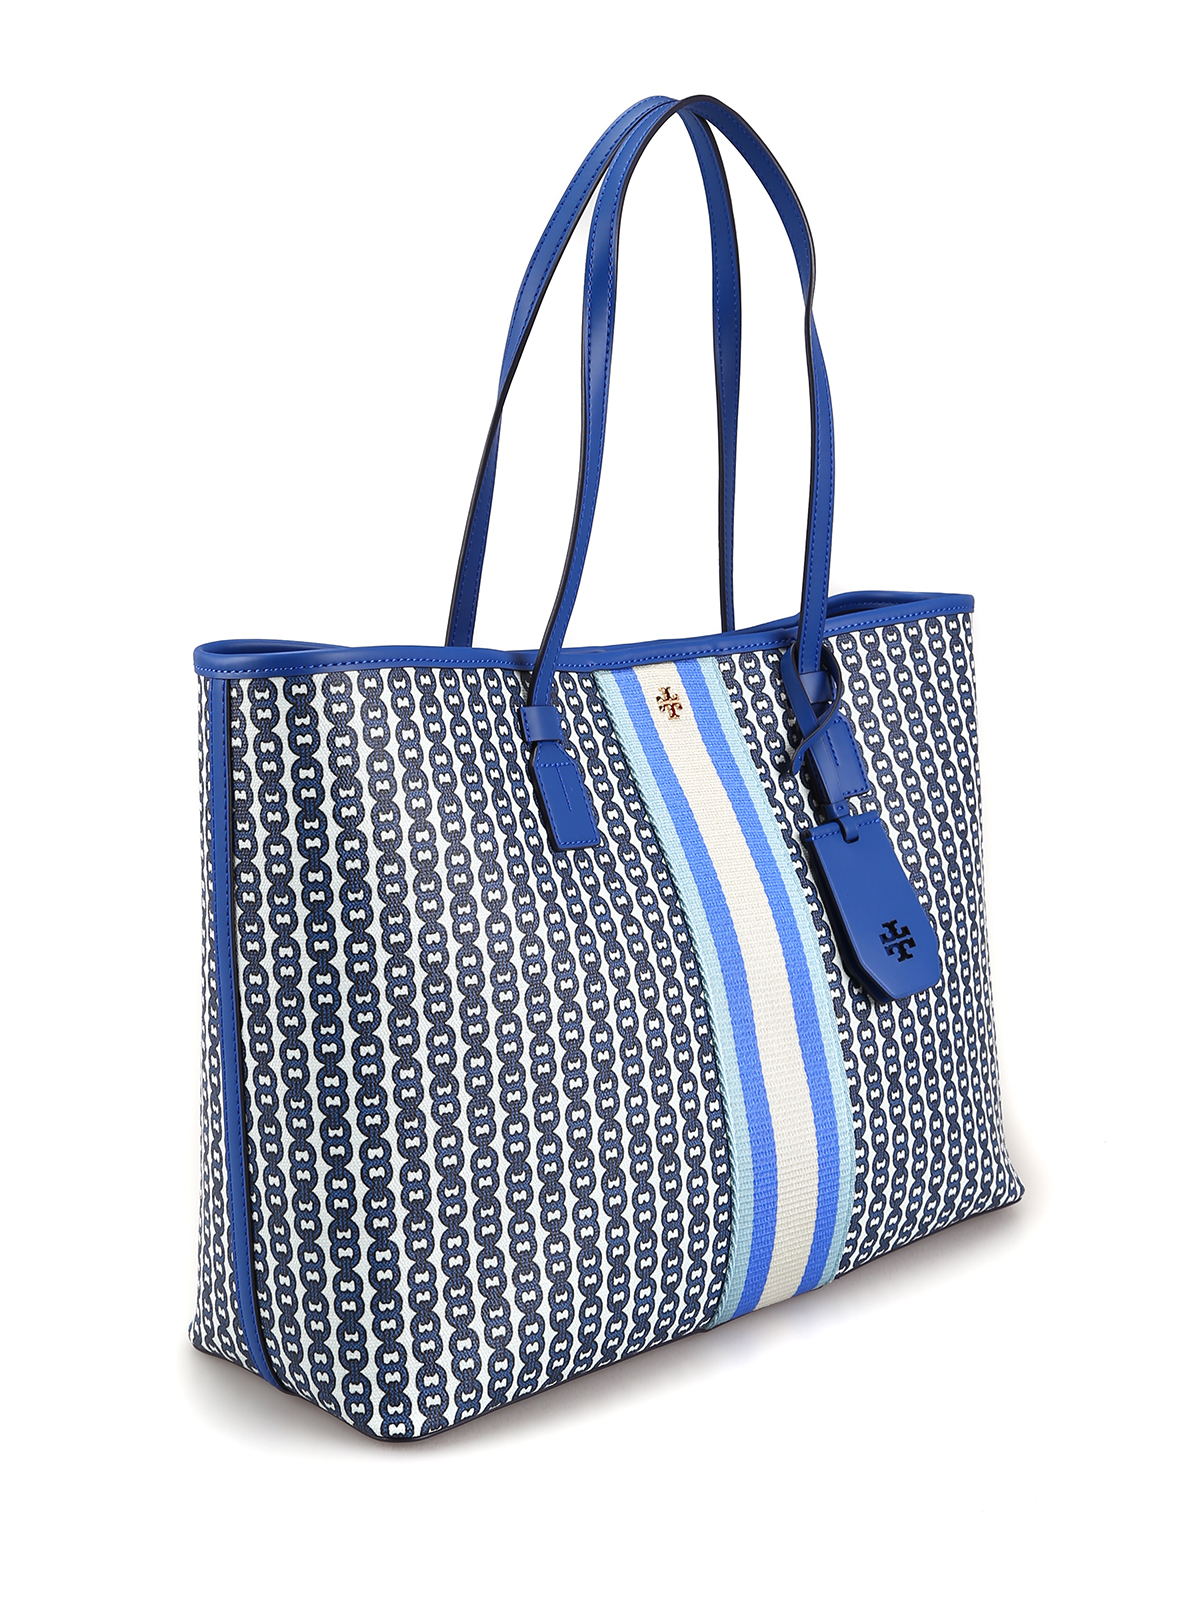 Tory Burch Gemini Link tote in textured coated canvas. 